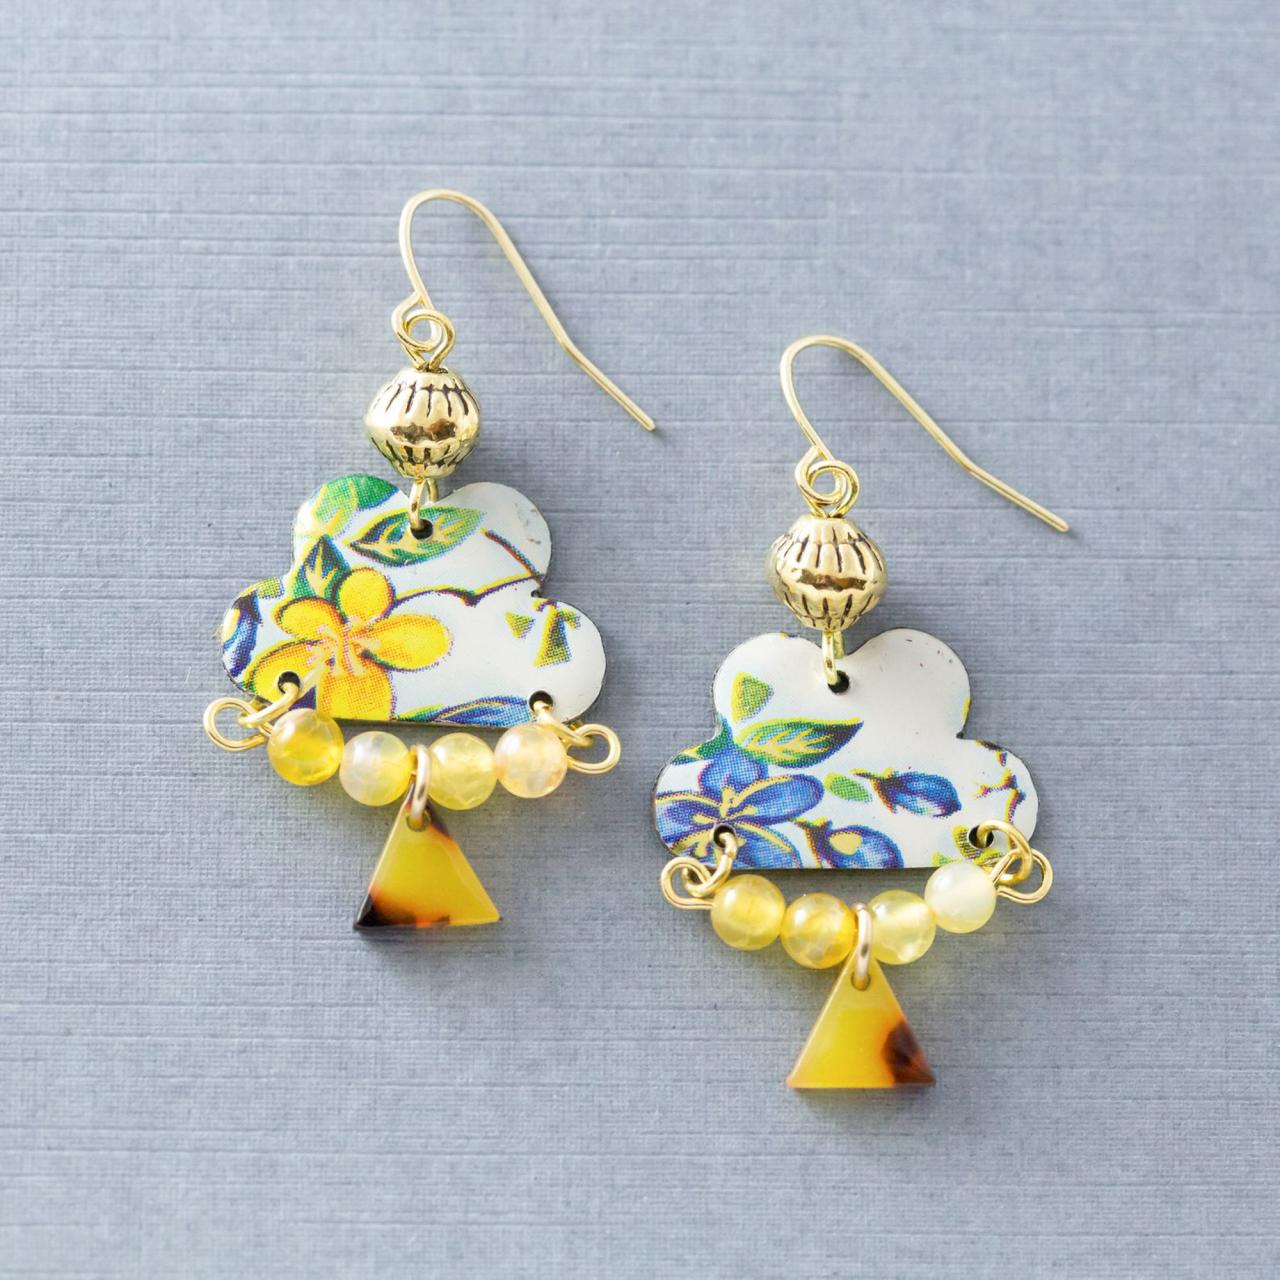 Bohemian Floral Earrings, Blue, Gold & Yellow Earrings, Triangle Earrings, Boho Earrings, Tin Jewelry, Flower Jewelry